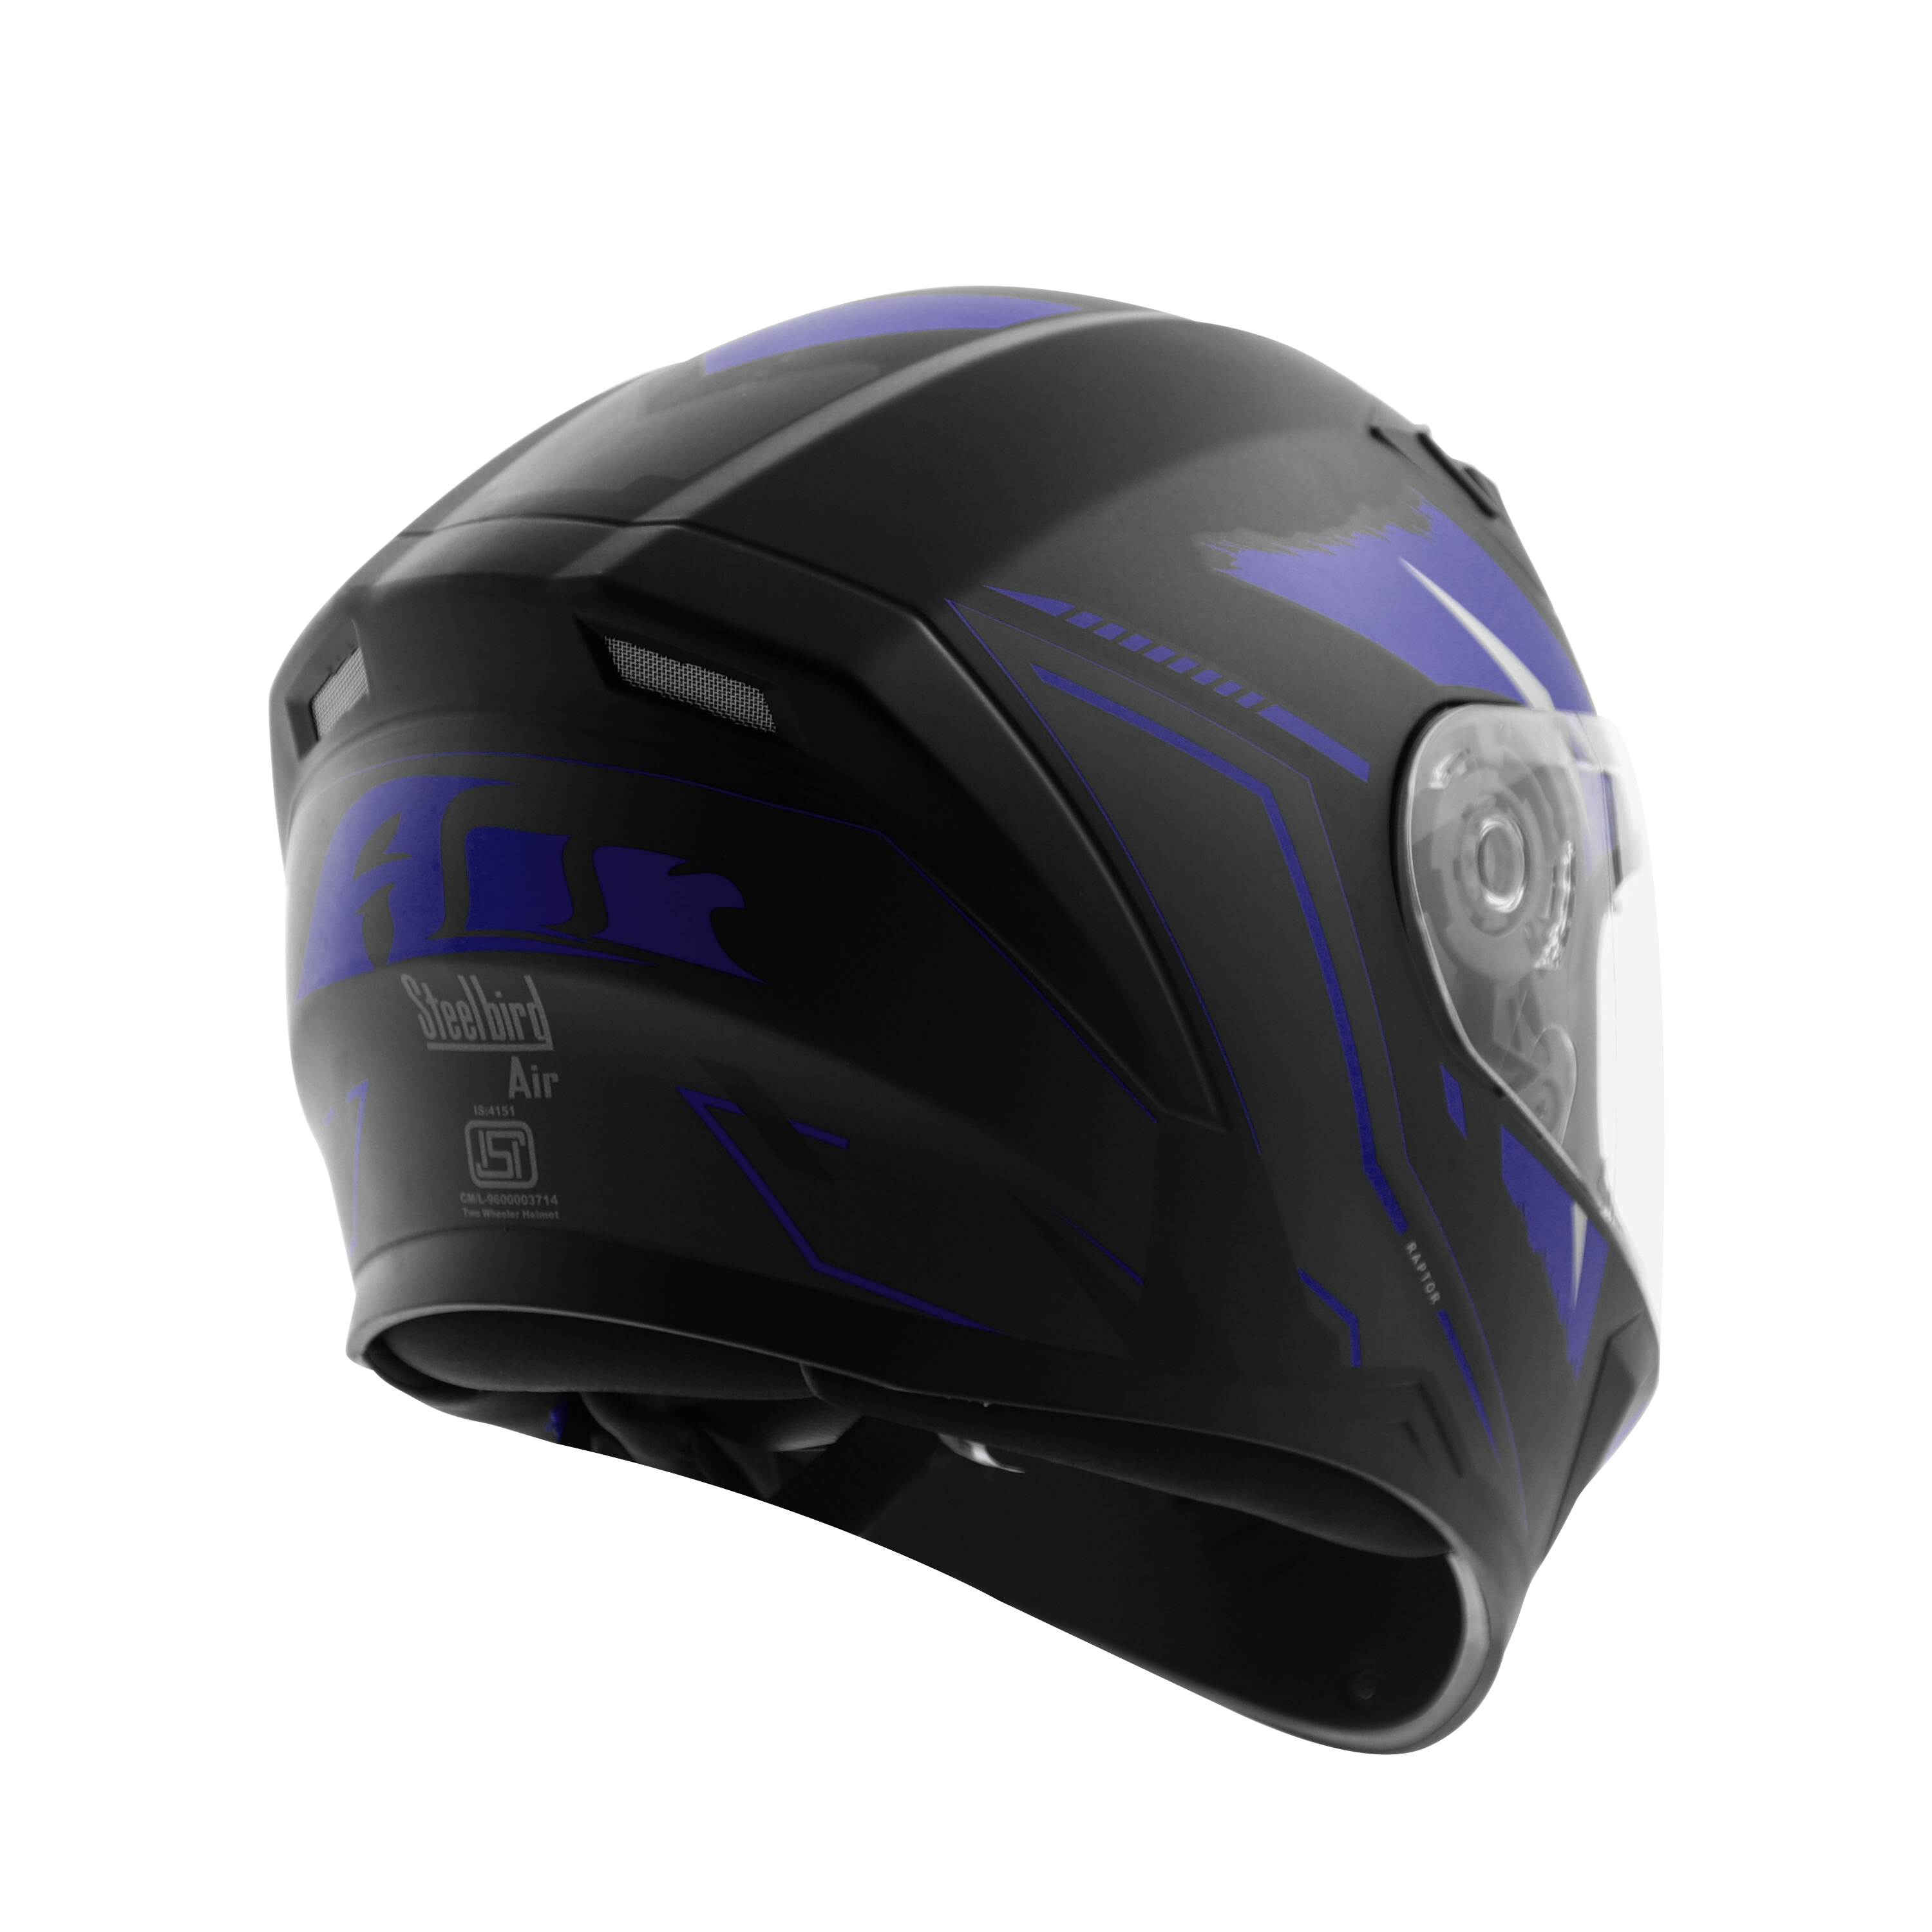 SBA-21 AIR (ISS) GLOSSY BLACK WITH BLUE WITH LONG CHEEK PAD INTERIOR